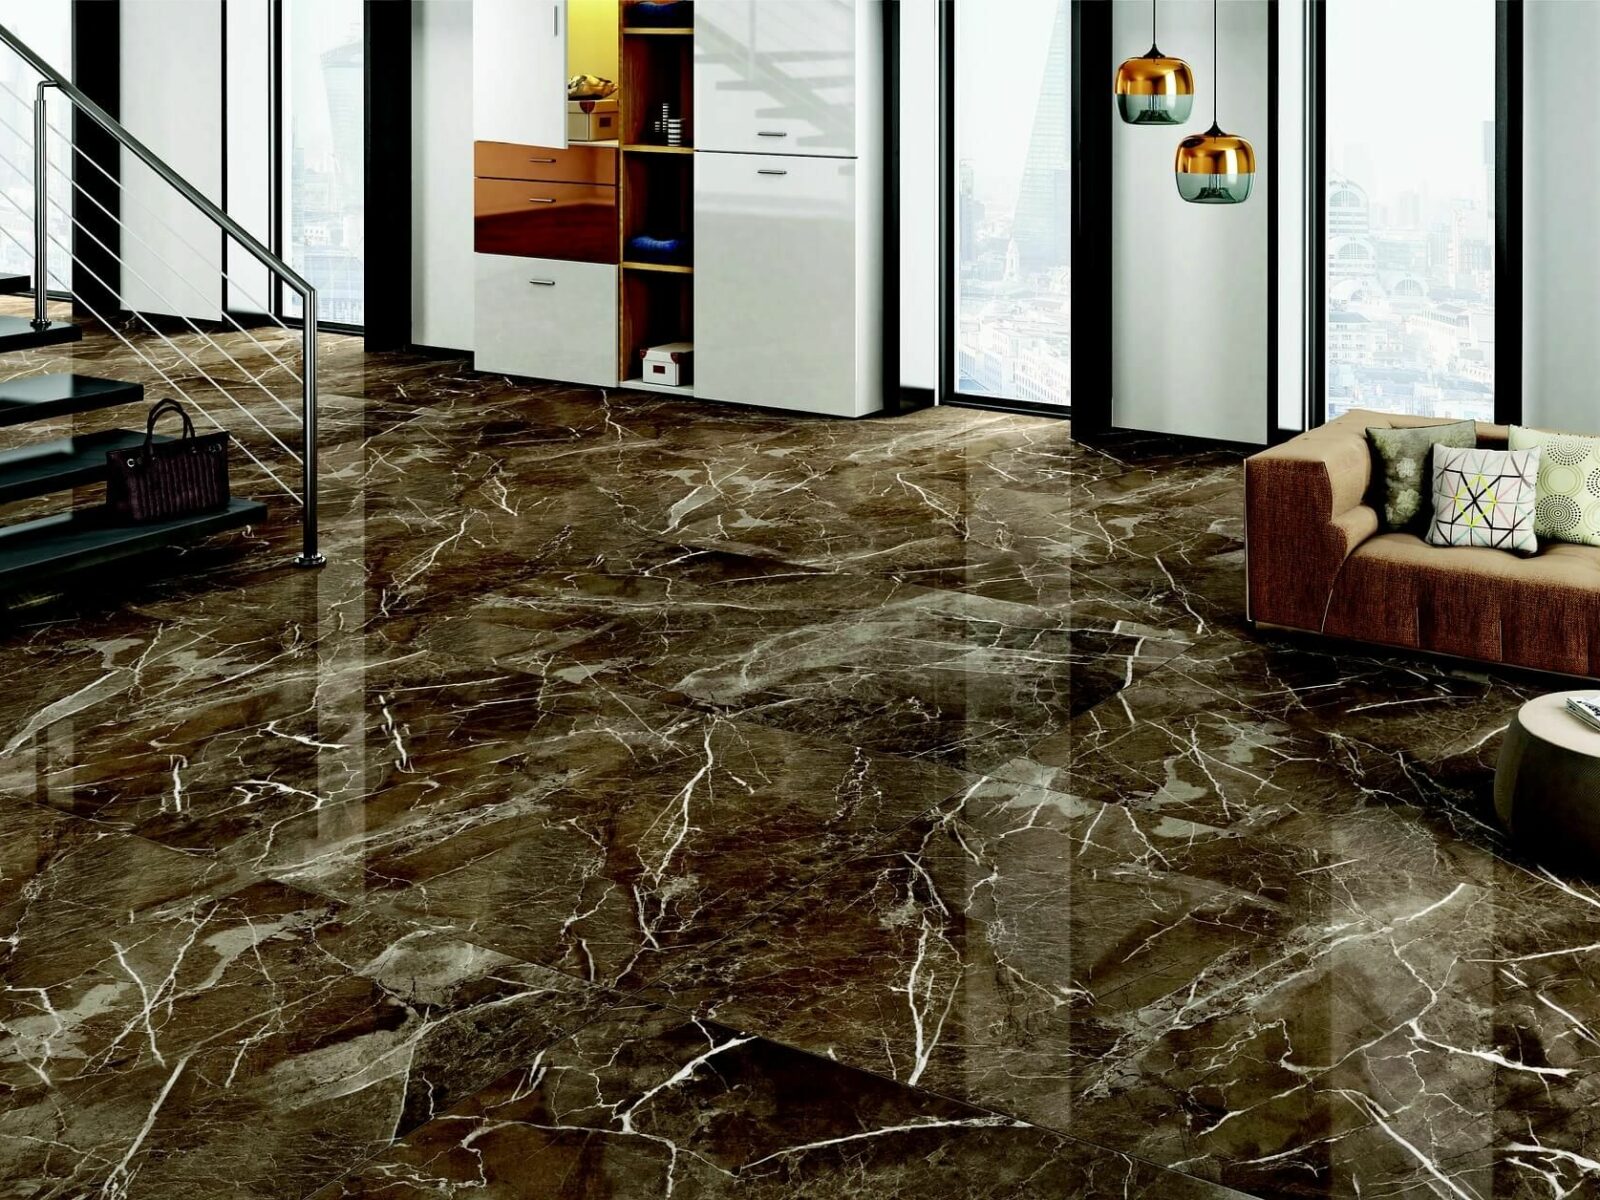 How to Pick the Best Vitrified Tiles?